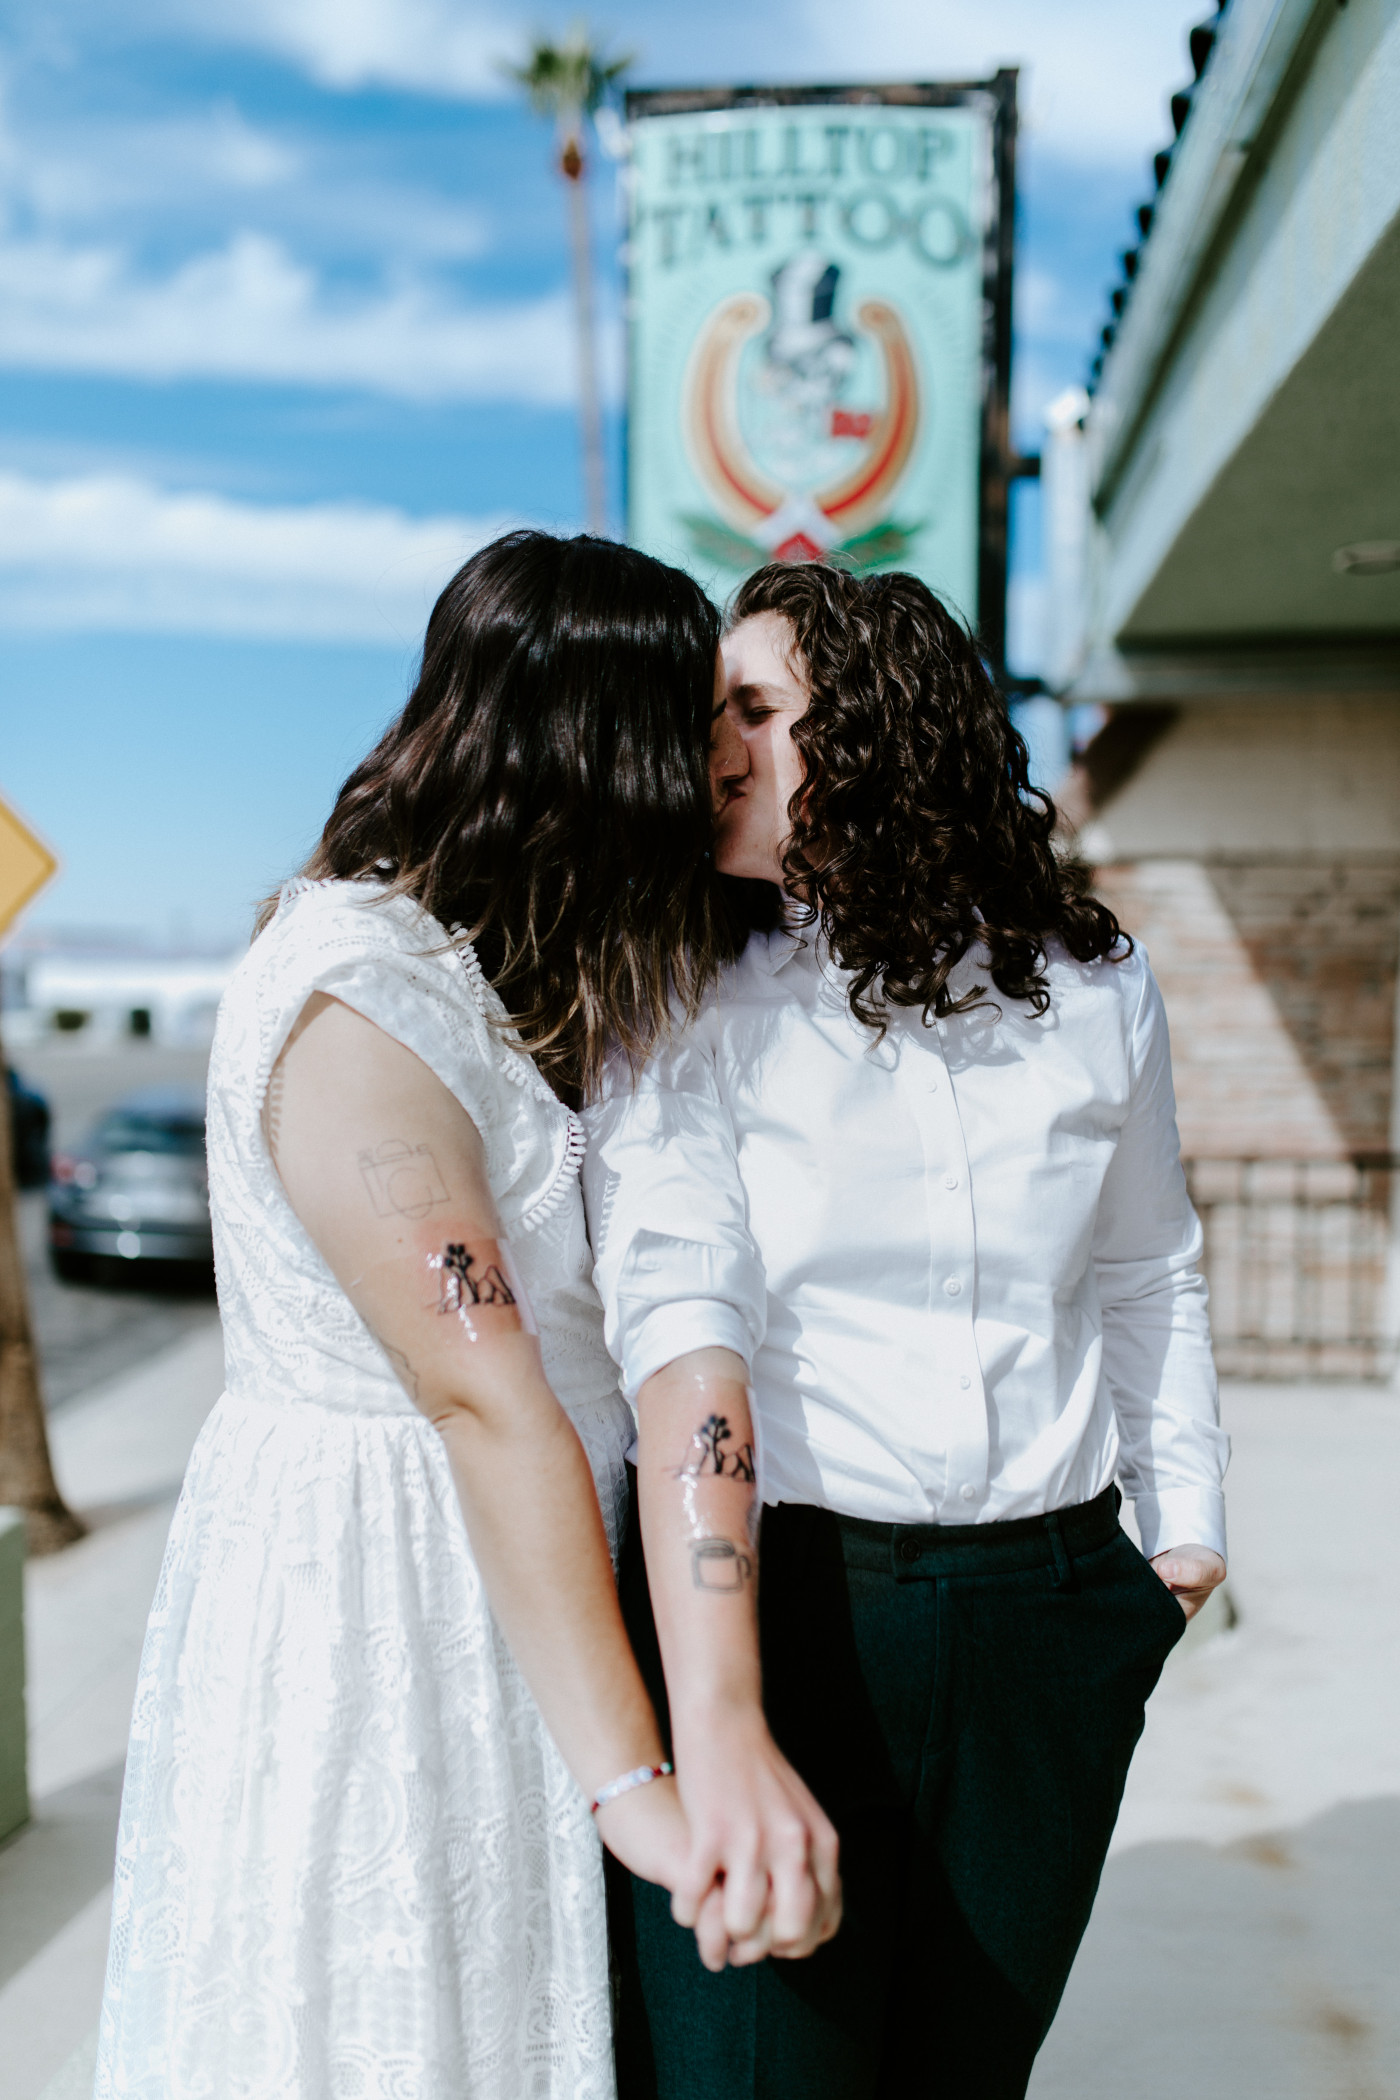 Becca and Madison share their matching tattoos.